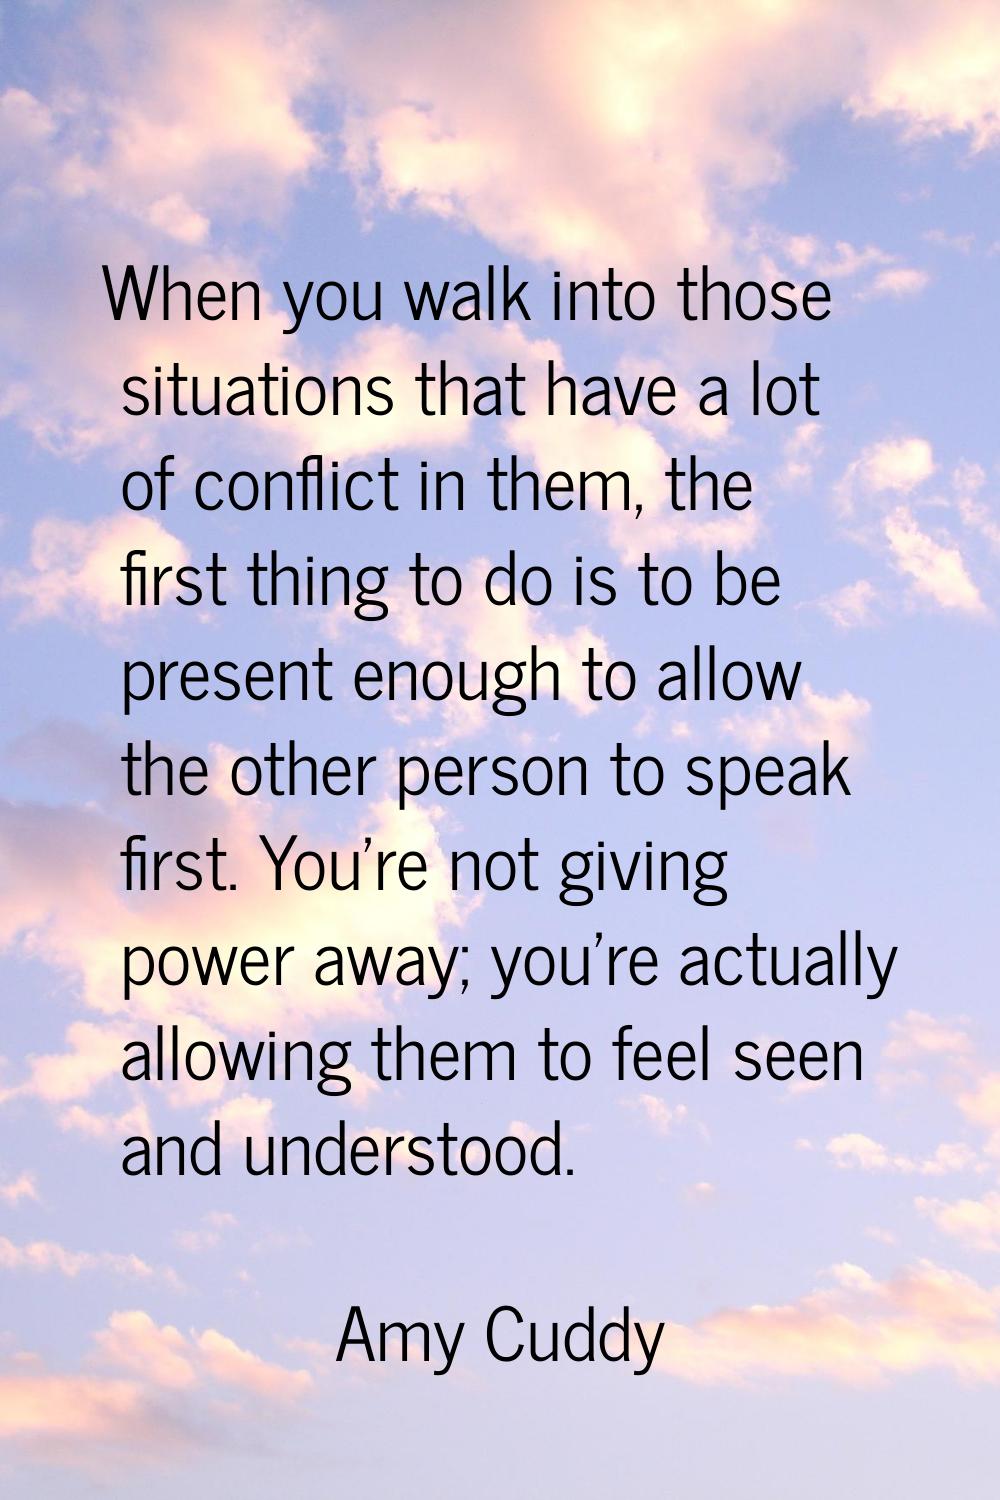 When you walk into those situations that have a lot of conflict in them, the first thing to do is t